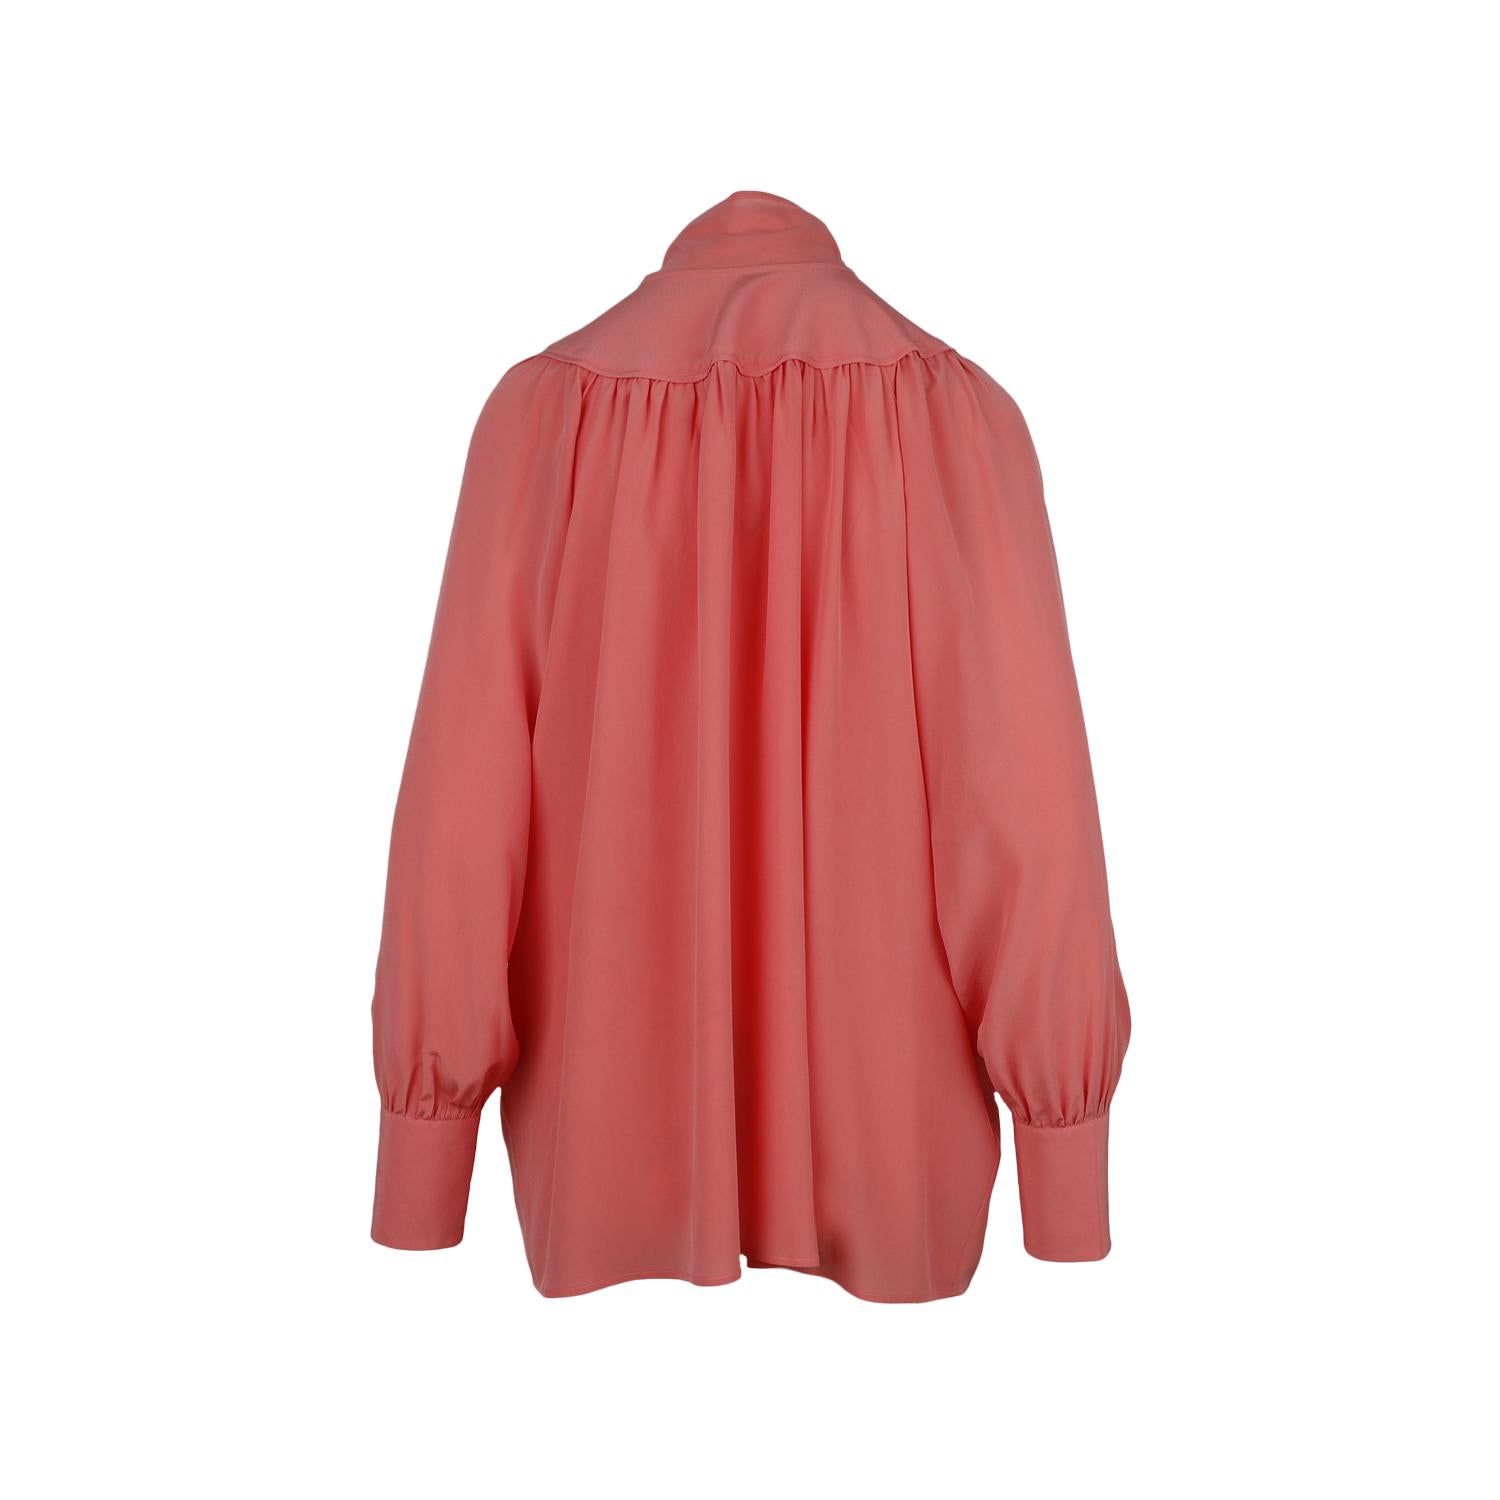 Valentino silk pink blouse featuring pussy-bow, long sleeve and button fastening.